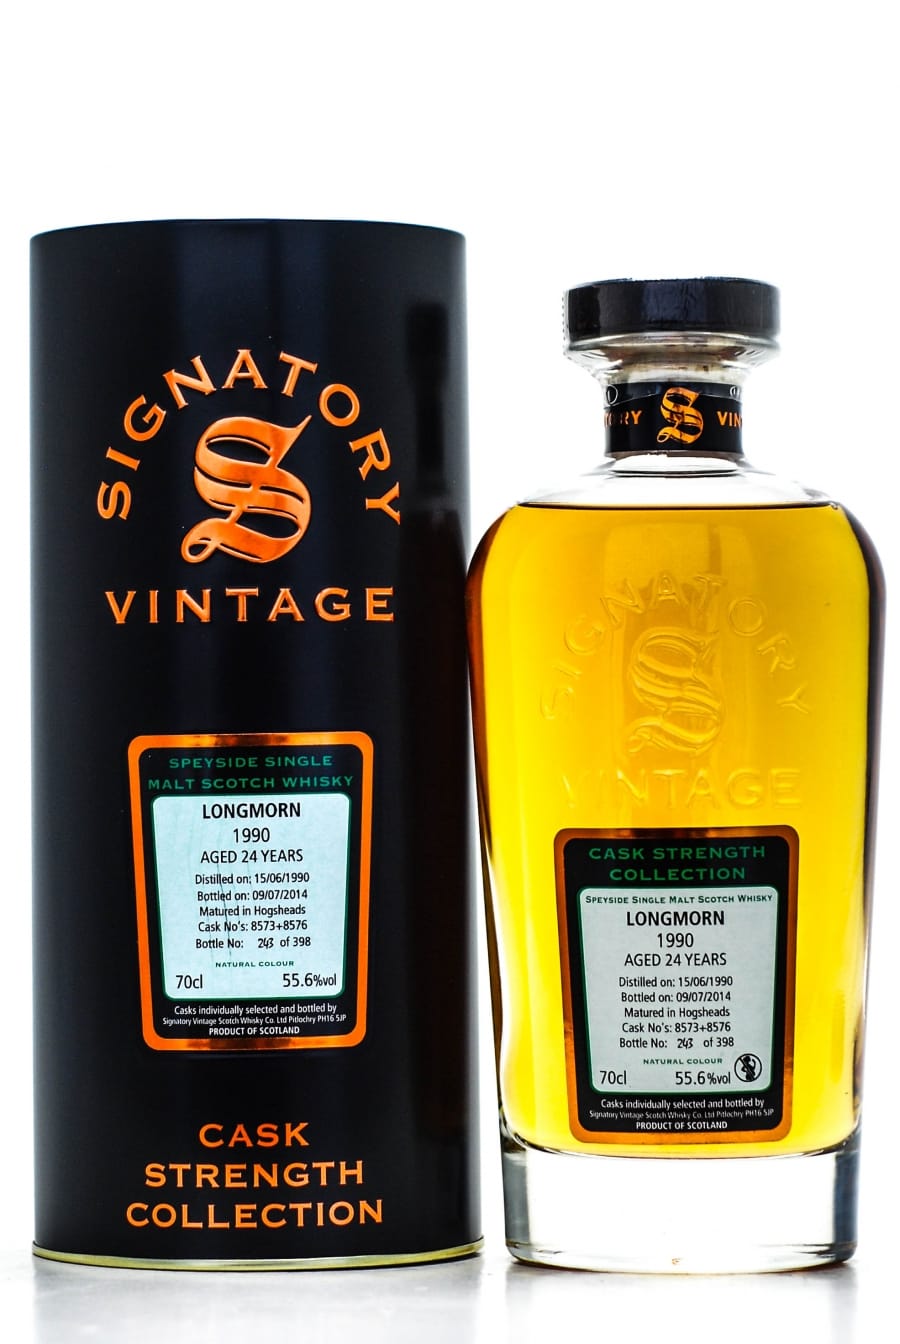 Longmorn - 24 Years Old Signatory Vintage Cask Strength Collection Cask:8573+85769 55.6% 1990 In Original Container